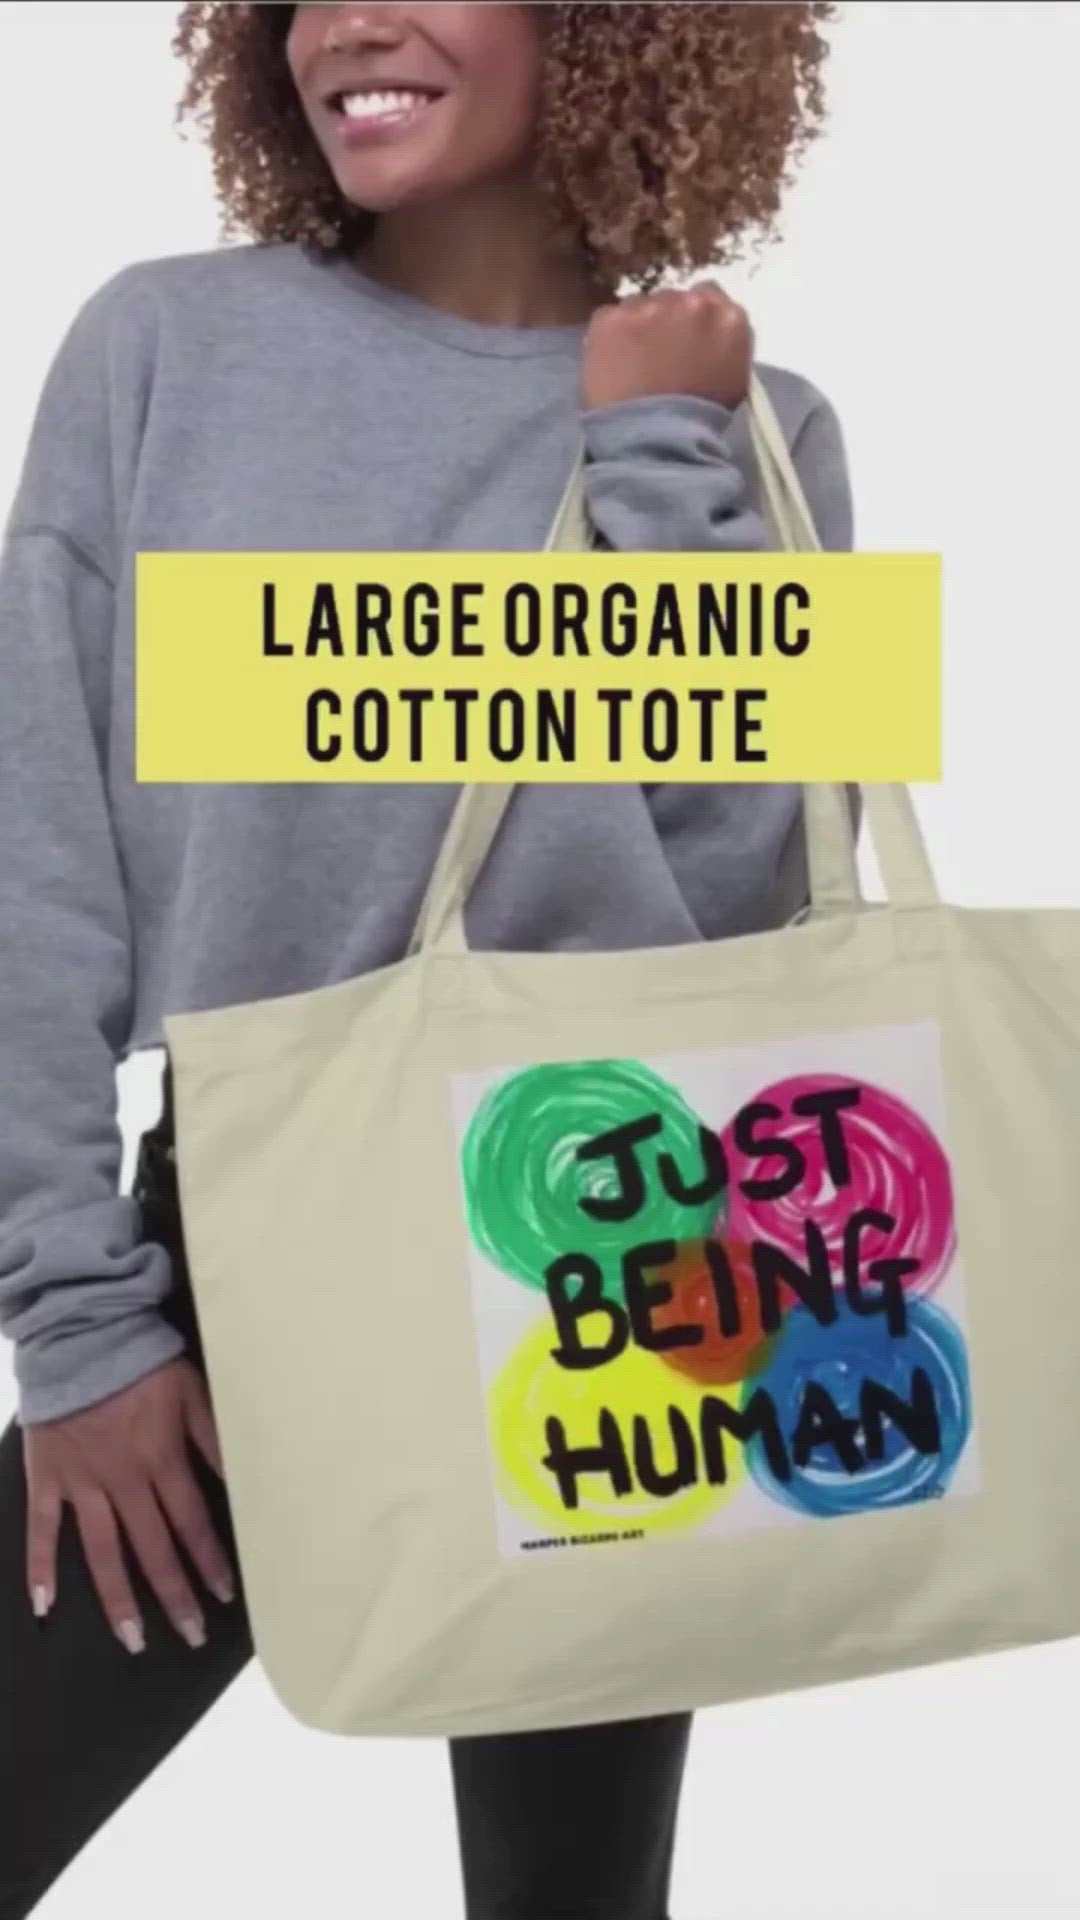 Large white tote bag 100% certified organic cotton with exclusive artwork "Just being human" print 